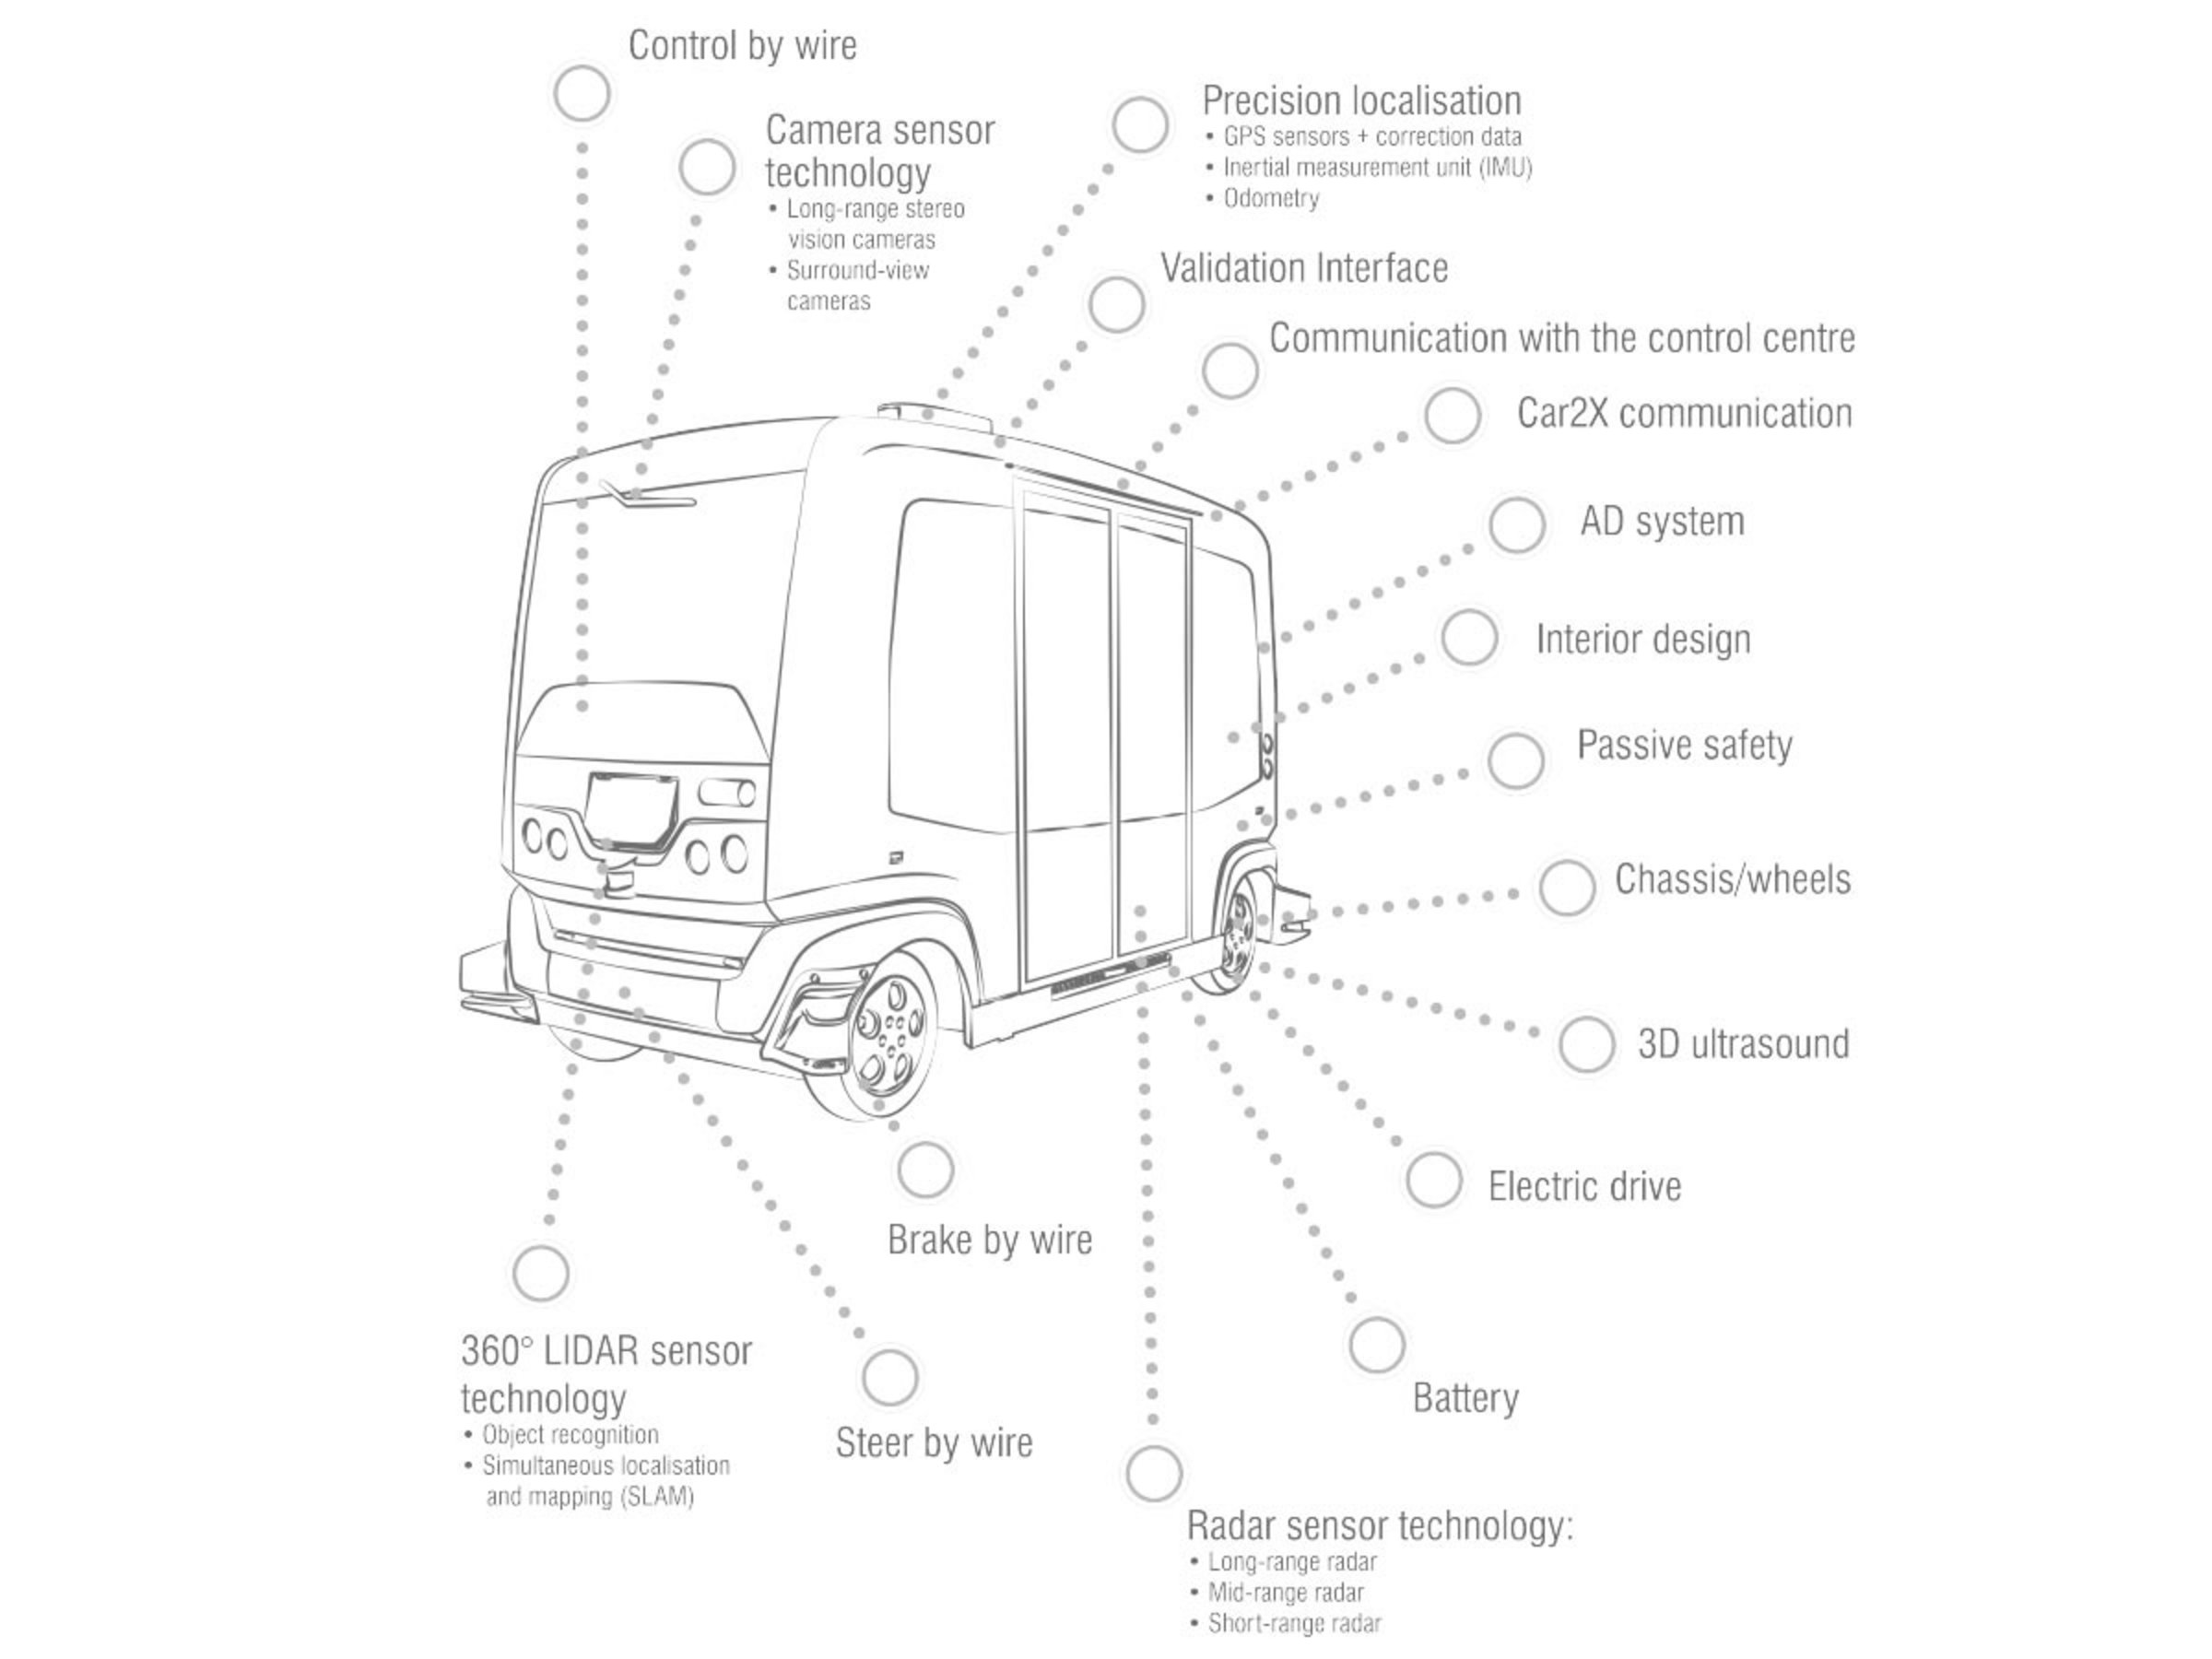 This graphic illustrates the safety concept in the vehicle